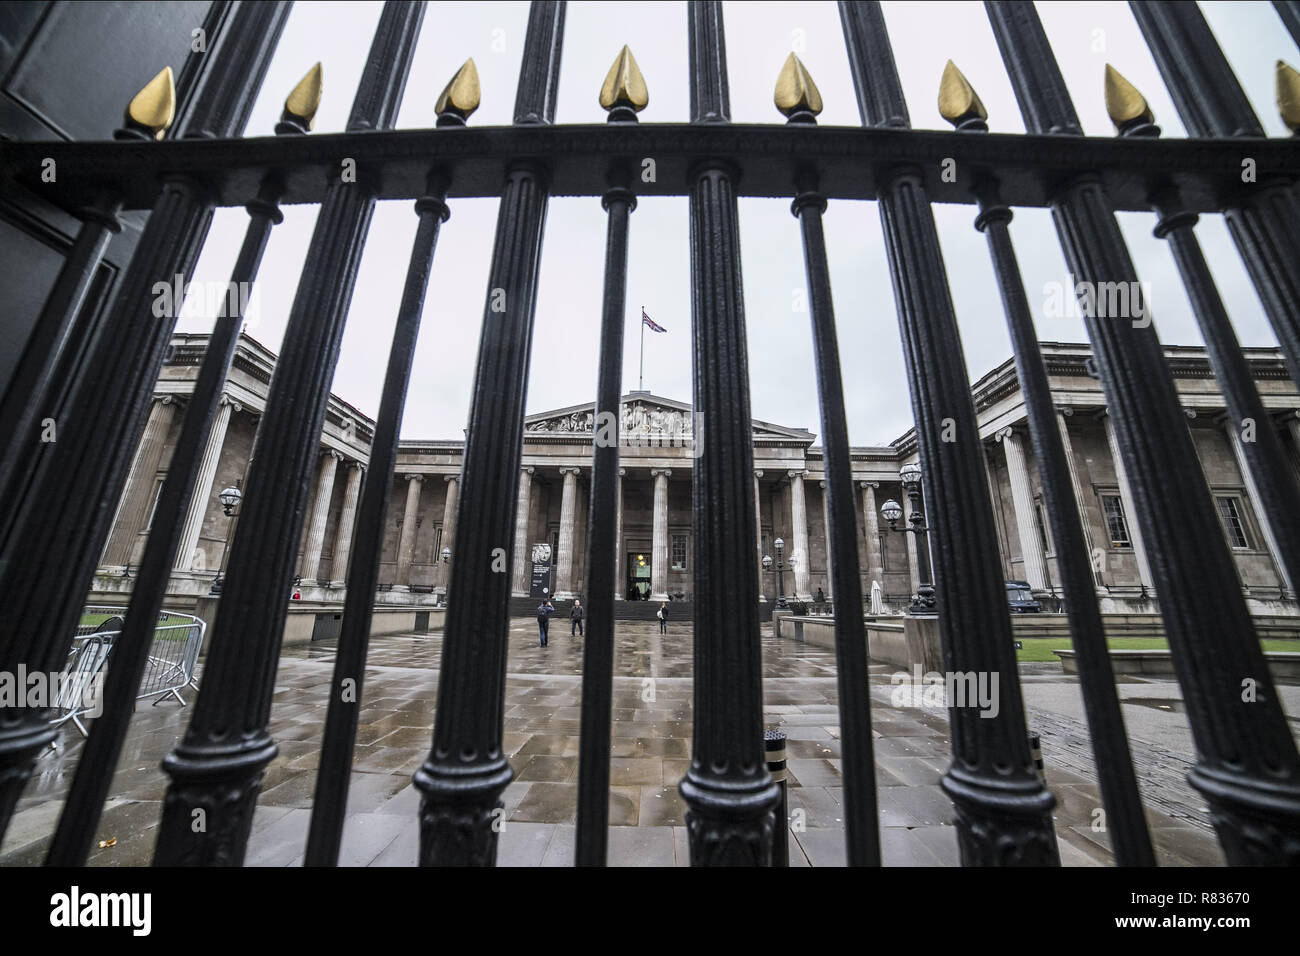 United Kingdom. 29th Nov, 2018. A bar fence seen at the museum. The British Museum in London, England, United Kingdom. The museum is a public institution with free entrance, dedicated to human history, art and culture. The museum has almost 6 million visitors per year and is ranked as the most popular attraction in the country. It was established in 1753 and has more than 8 million objects. Credit: Nicolas Economou/SOPA Images/ZUMA Wire/Alamy Live News Stock Photo